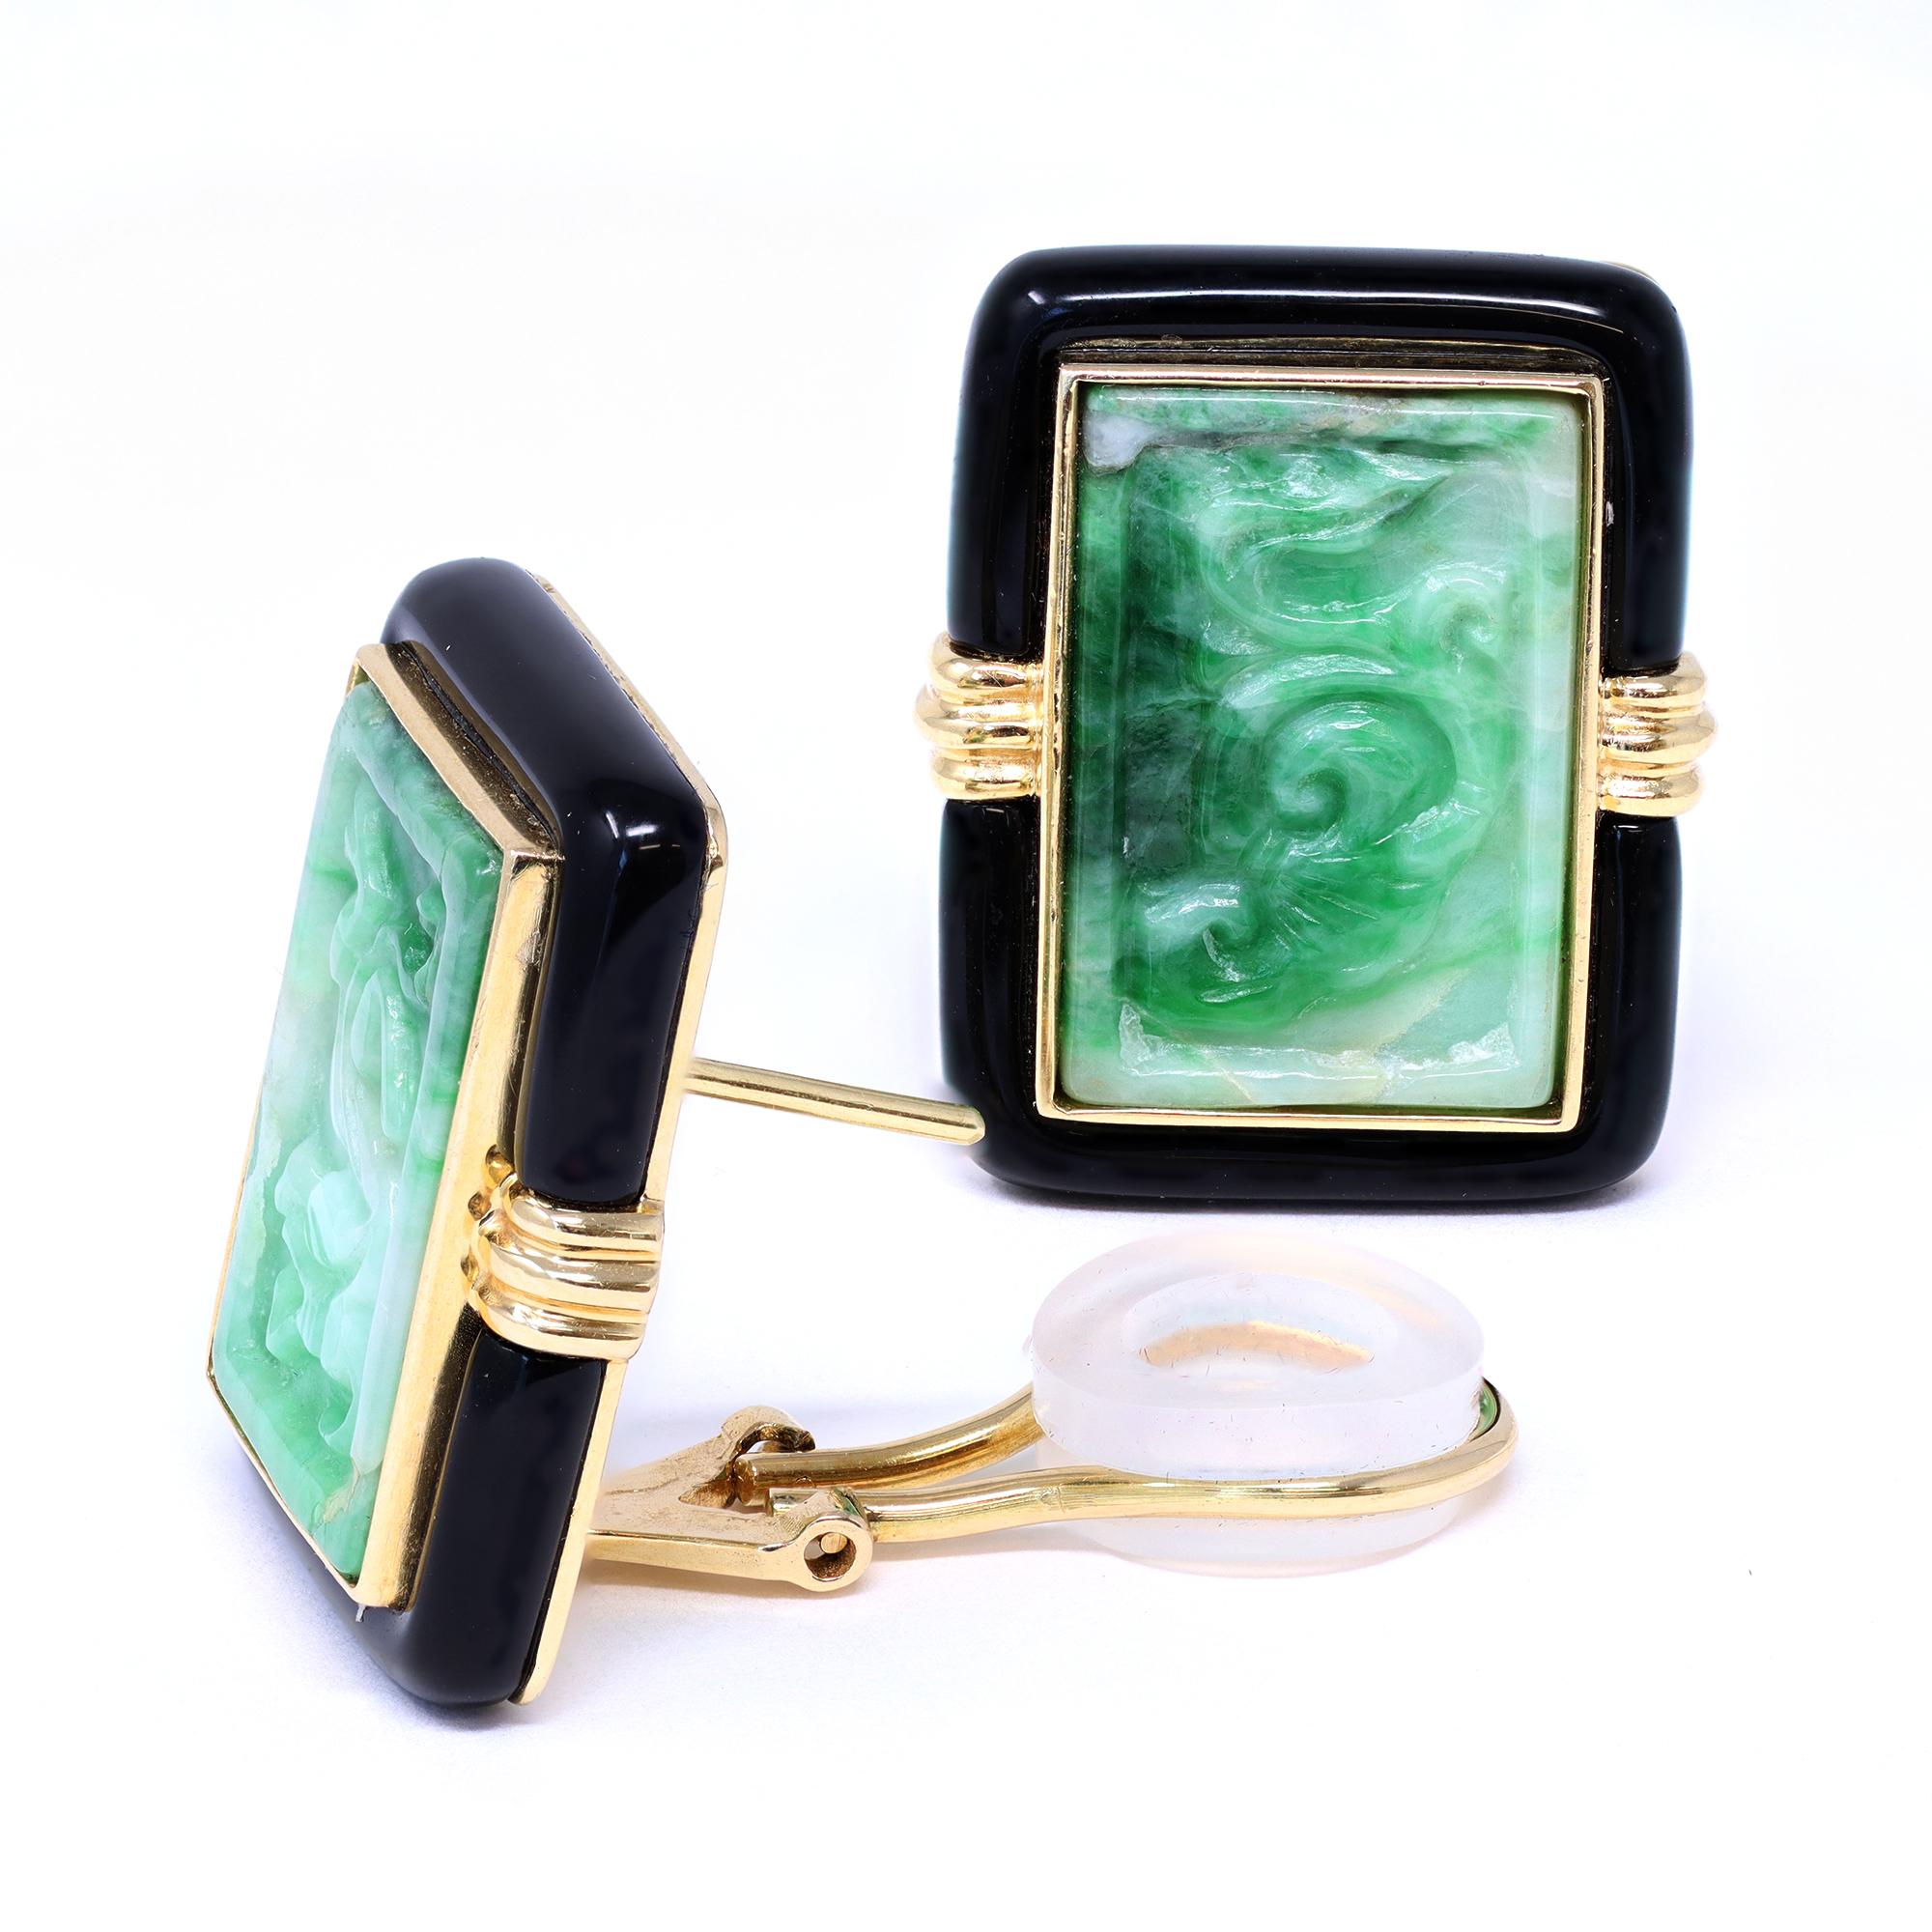 A vintage pair of Jadeite jade carving ear clips with onyx. The jade carvings are natural and untreated, with no indication of dye. The earrings are marked AJF and are set in 14-karat yellow gold. The gross weight is 19 grams. The earrings measure